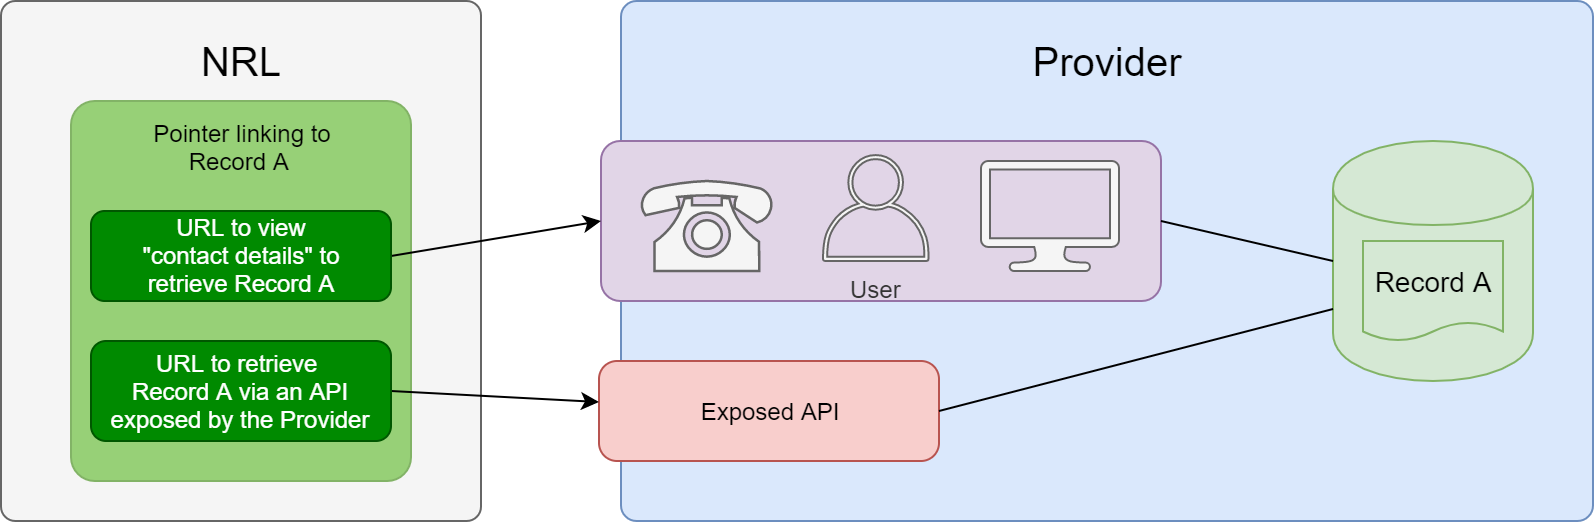 Pointers link to Records by providing either an API endpoint or contact details of the Provider